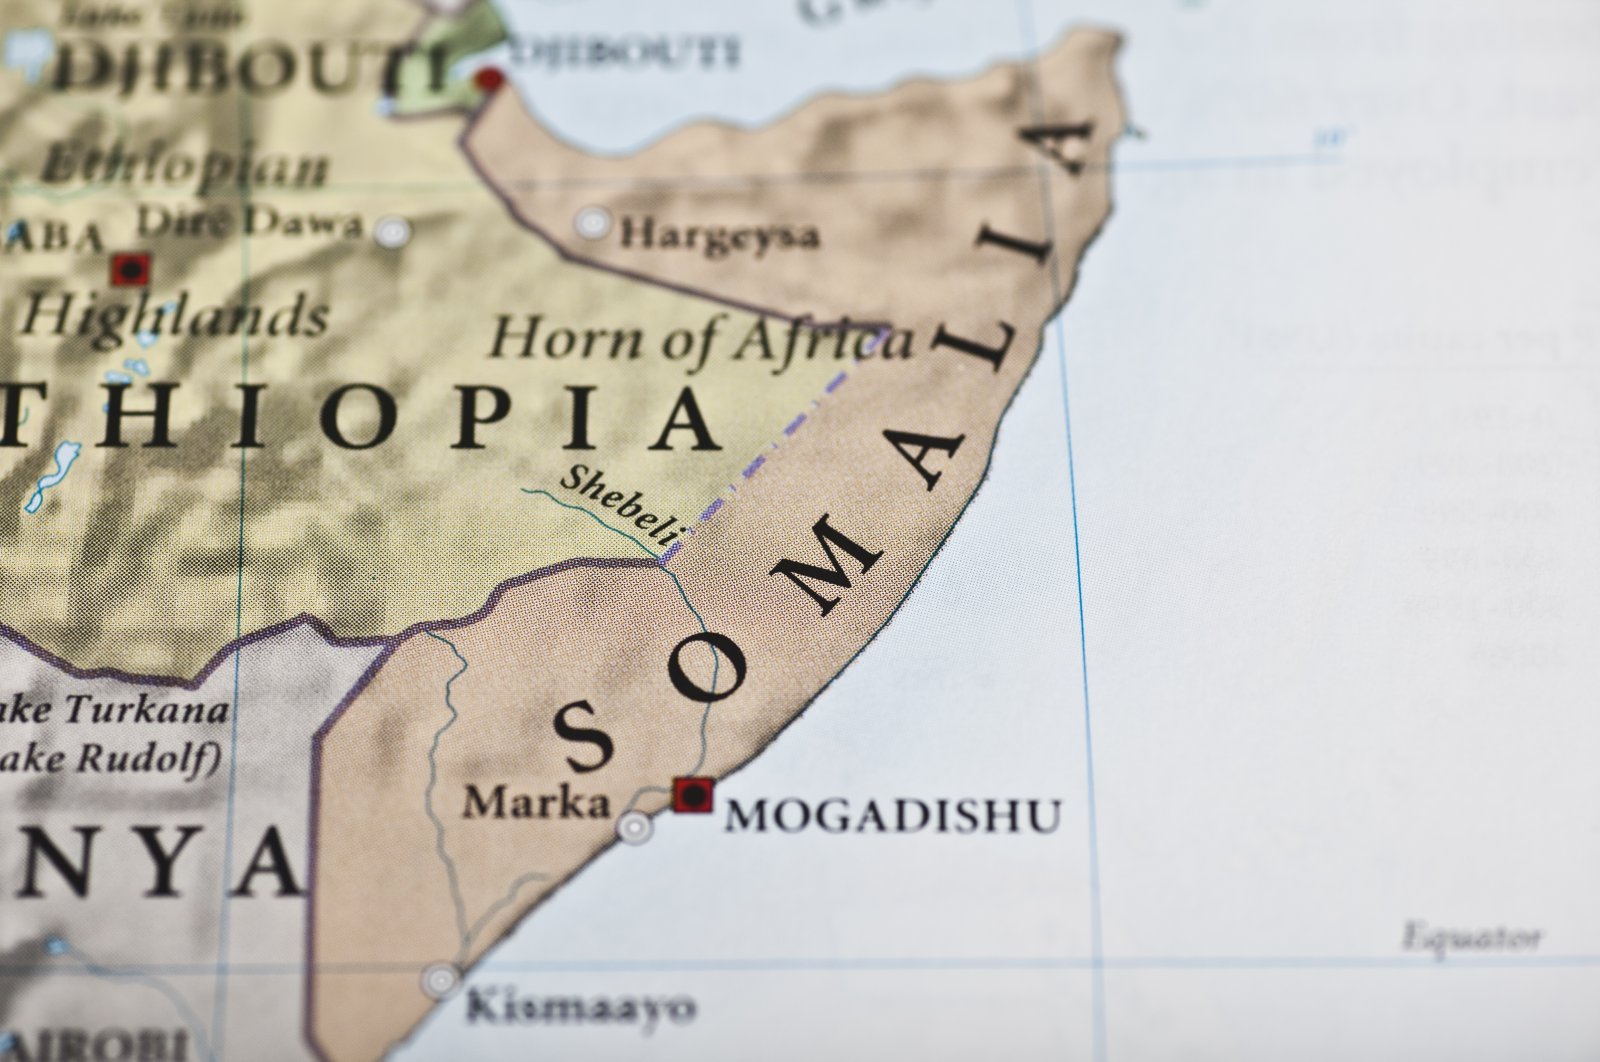 A part of a map of the African continent showing Somalia. (Photo by Getty Images)